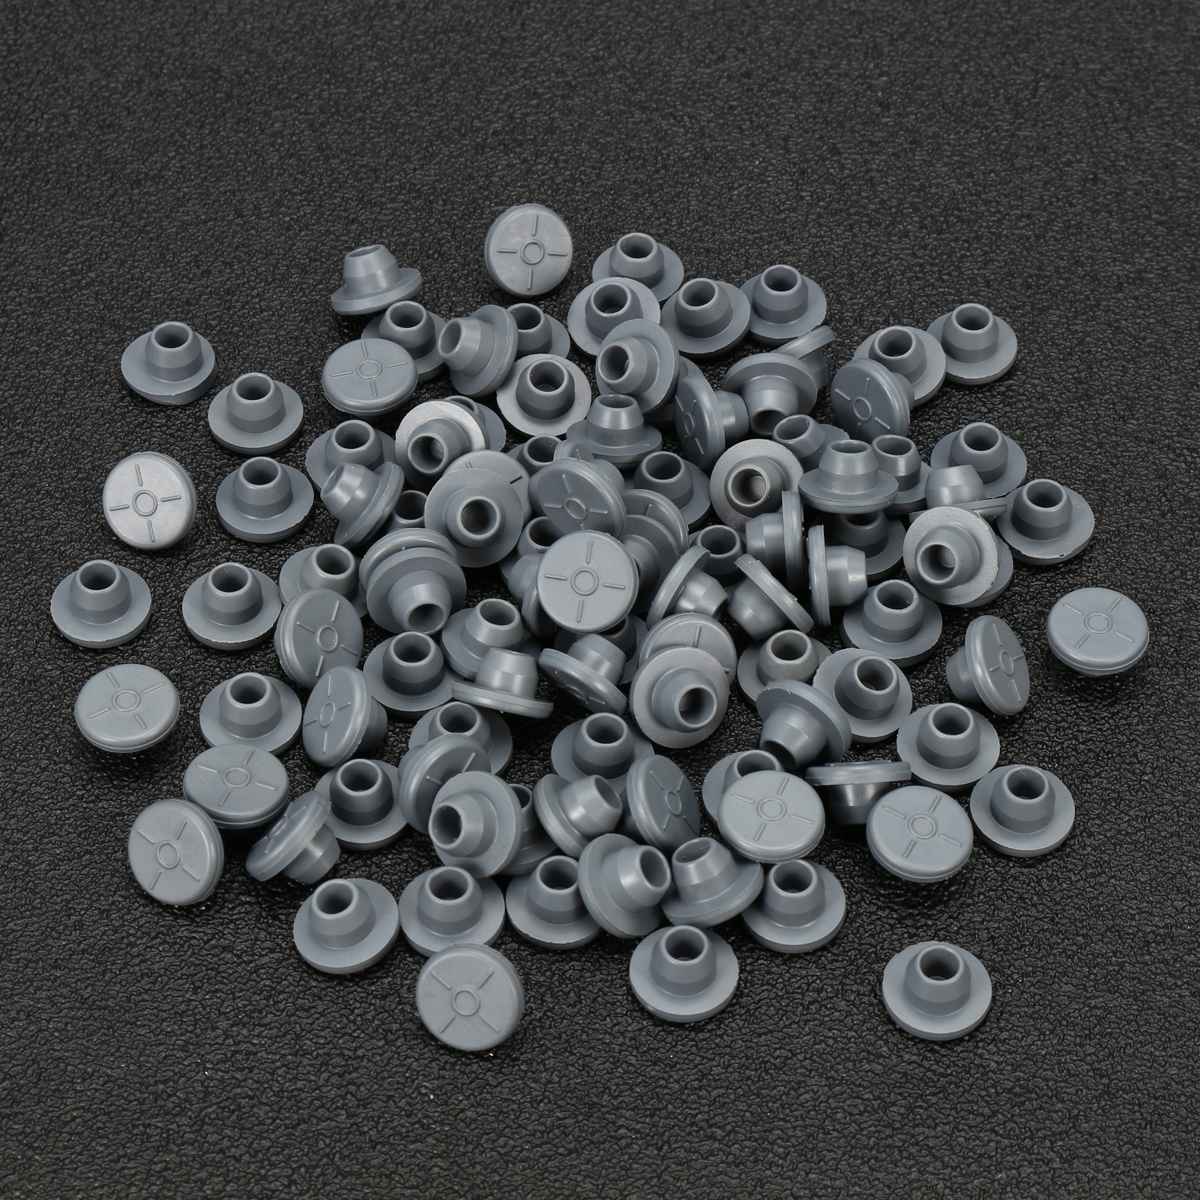 100Pcs Rubber Stoppers Self Sealing Injection Ports Inoculation Medical For 13mm Glass Bottles Vials Opening Sealing Organizer